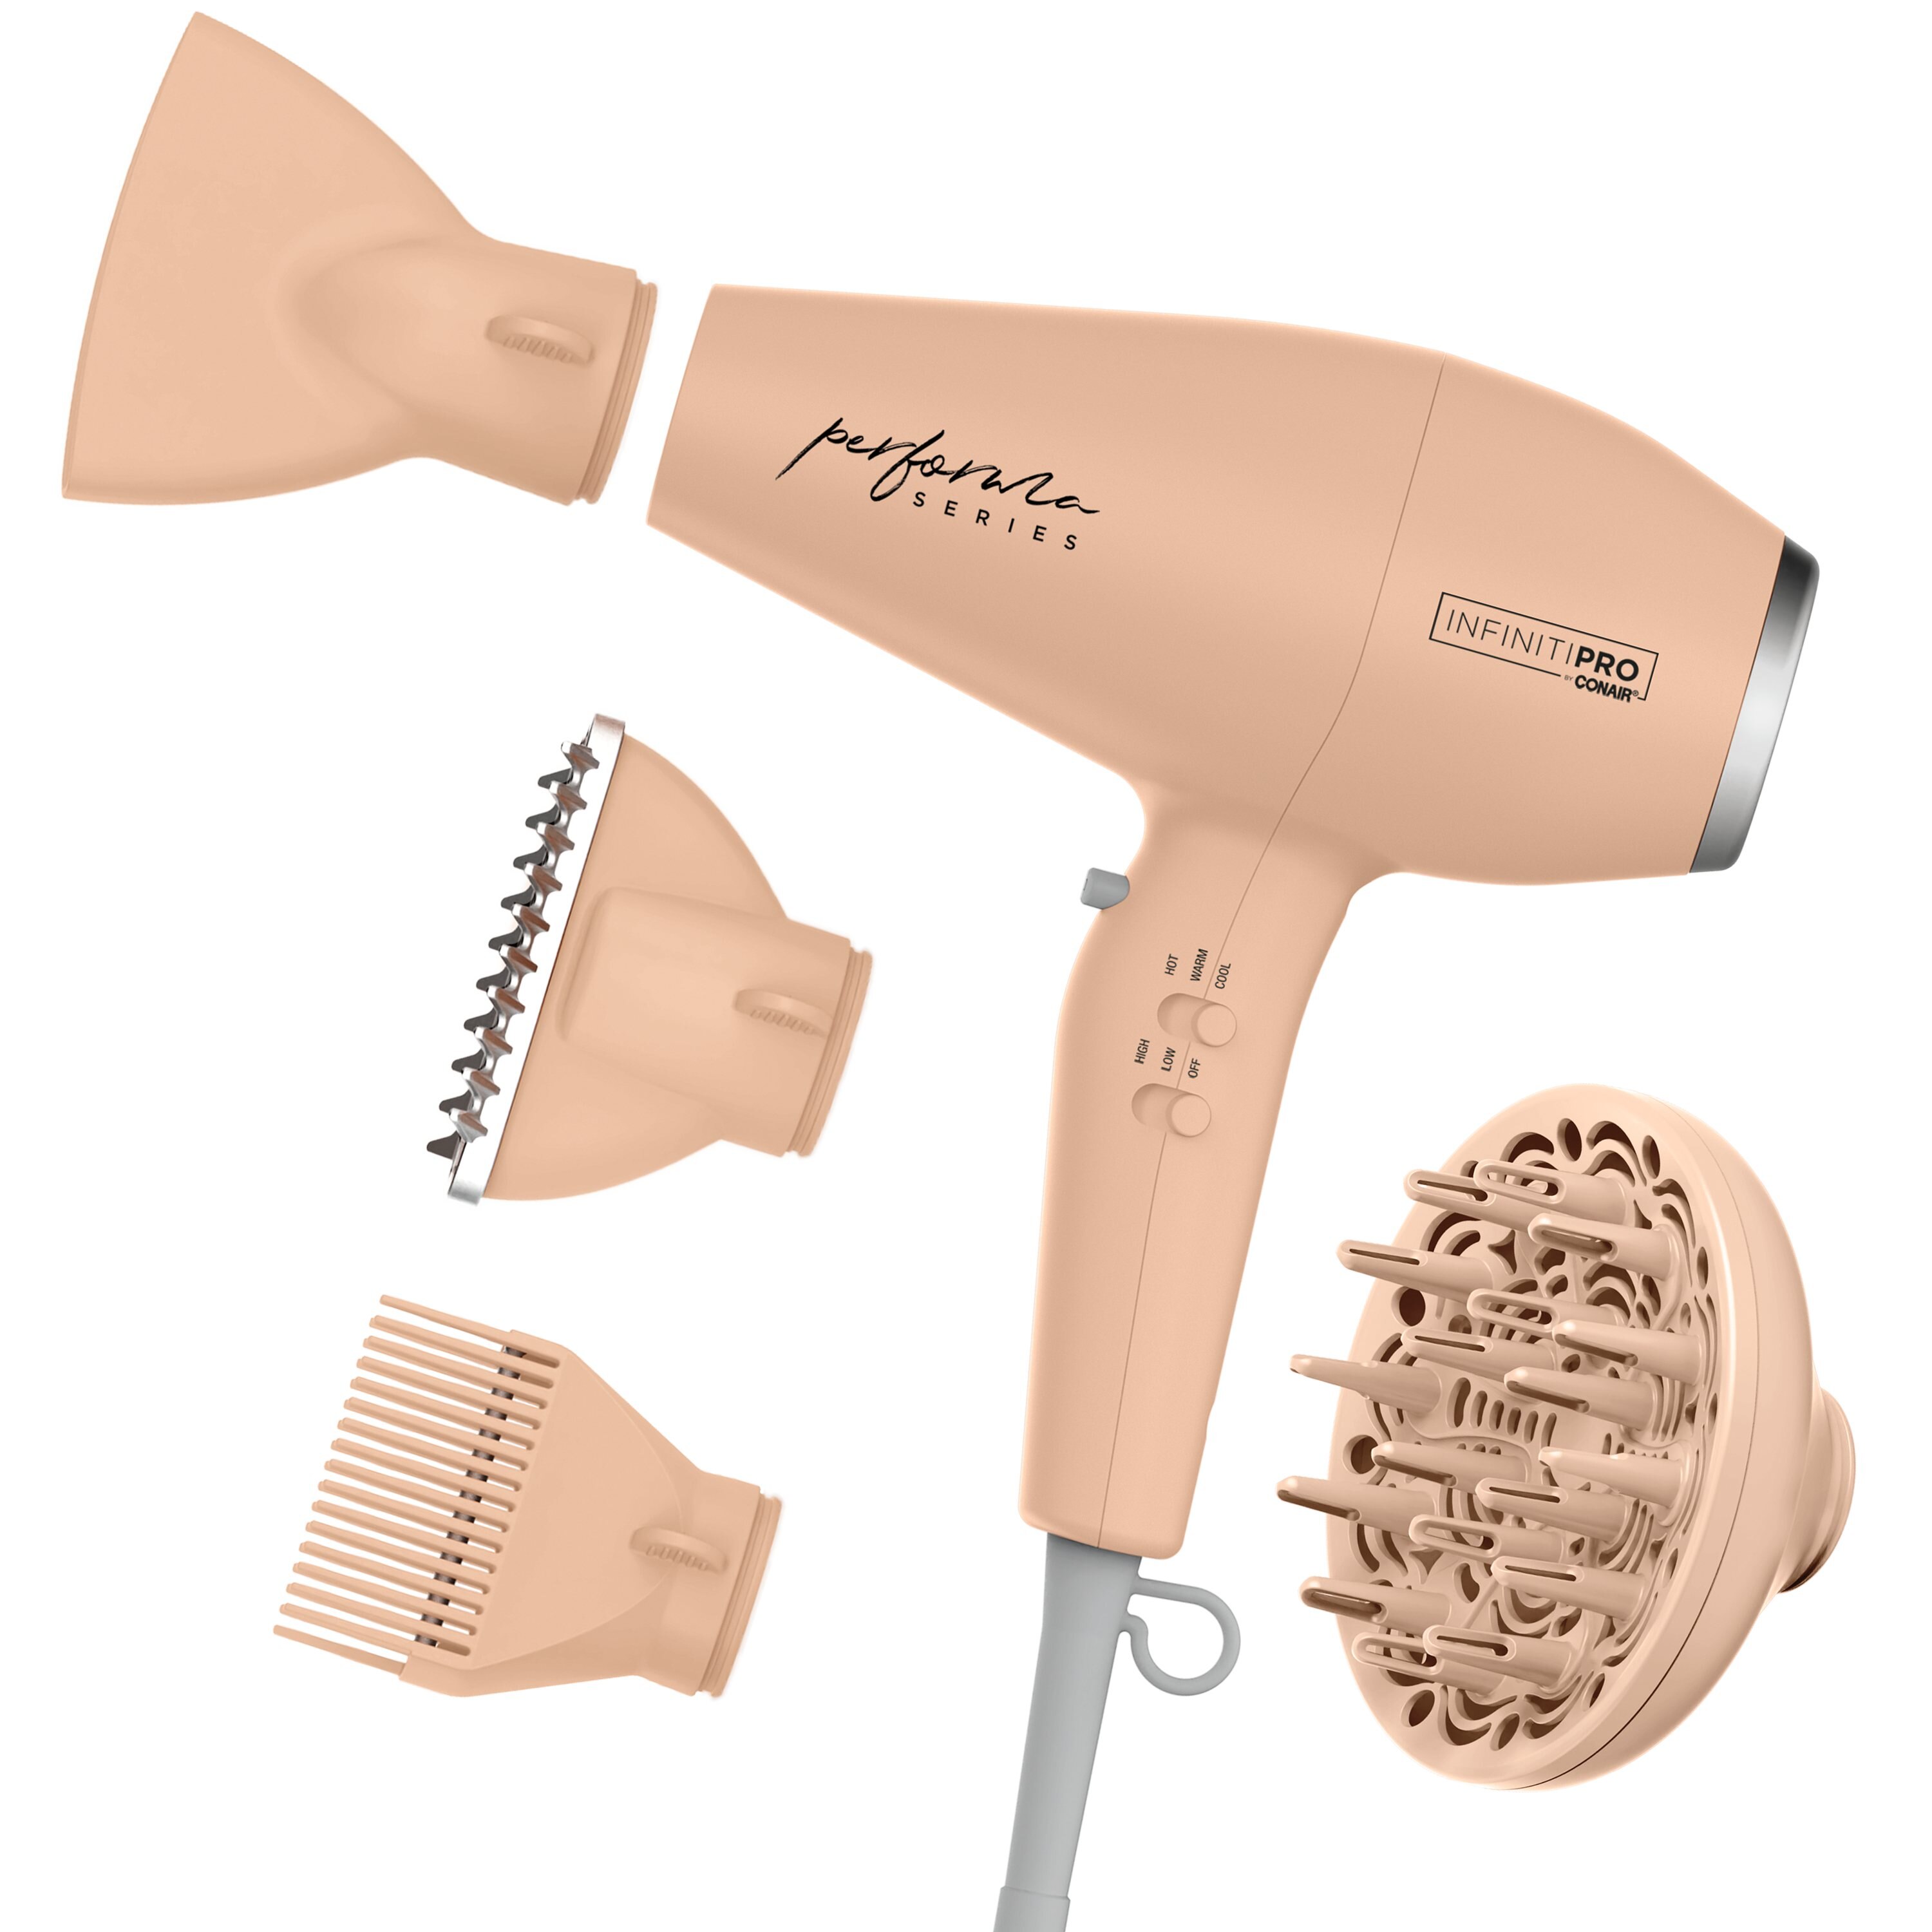 InfinitiPRO by Conair Ionic Ceramic Dryer, Performa Series